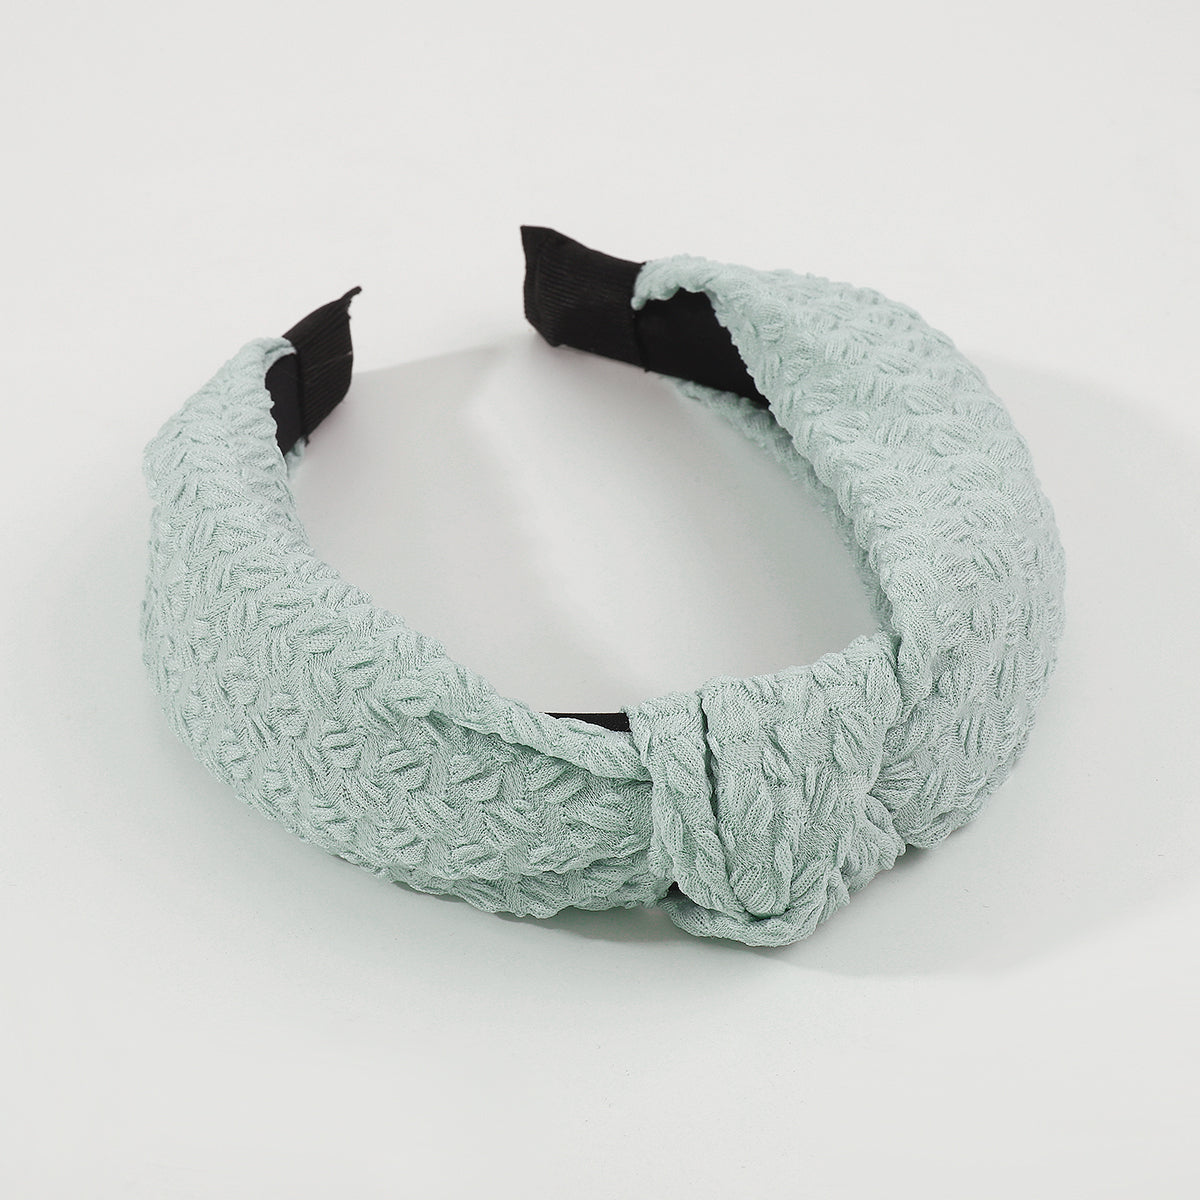 Embossed Top Knotted Headband medyjewelry